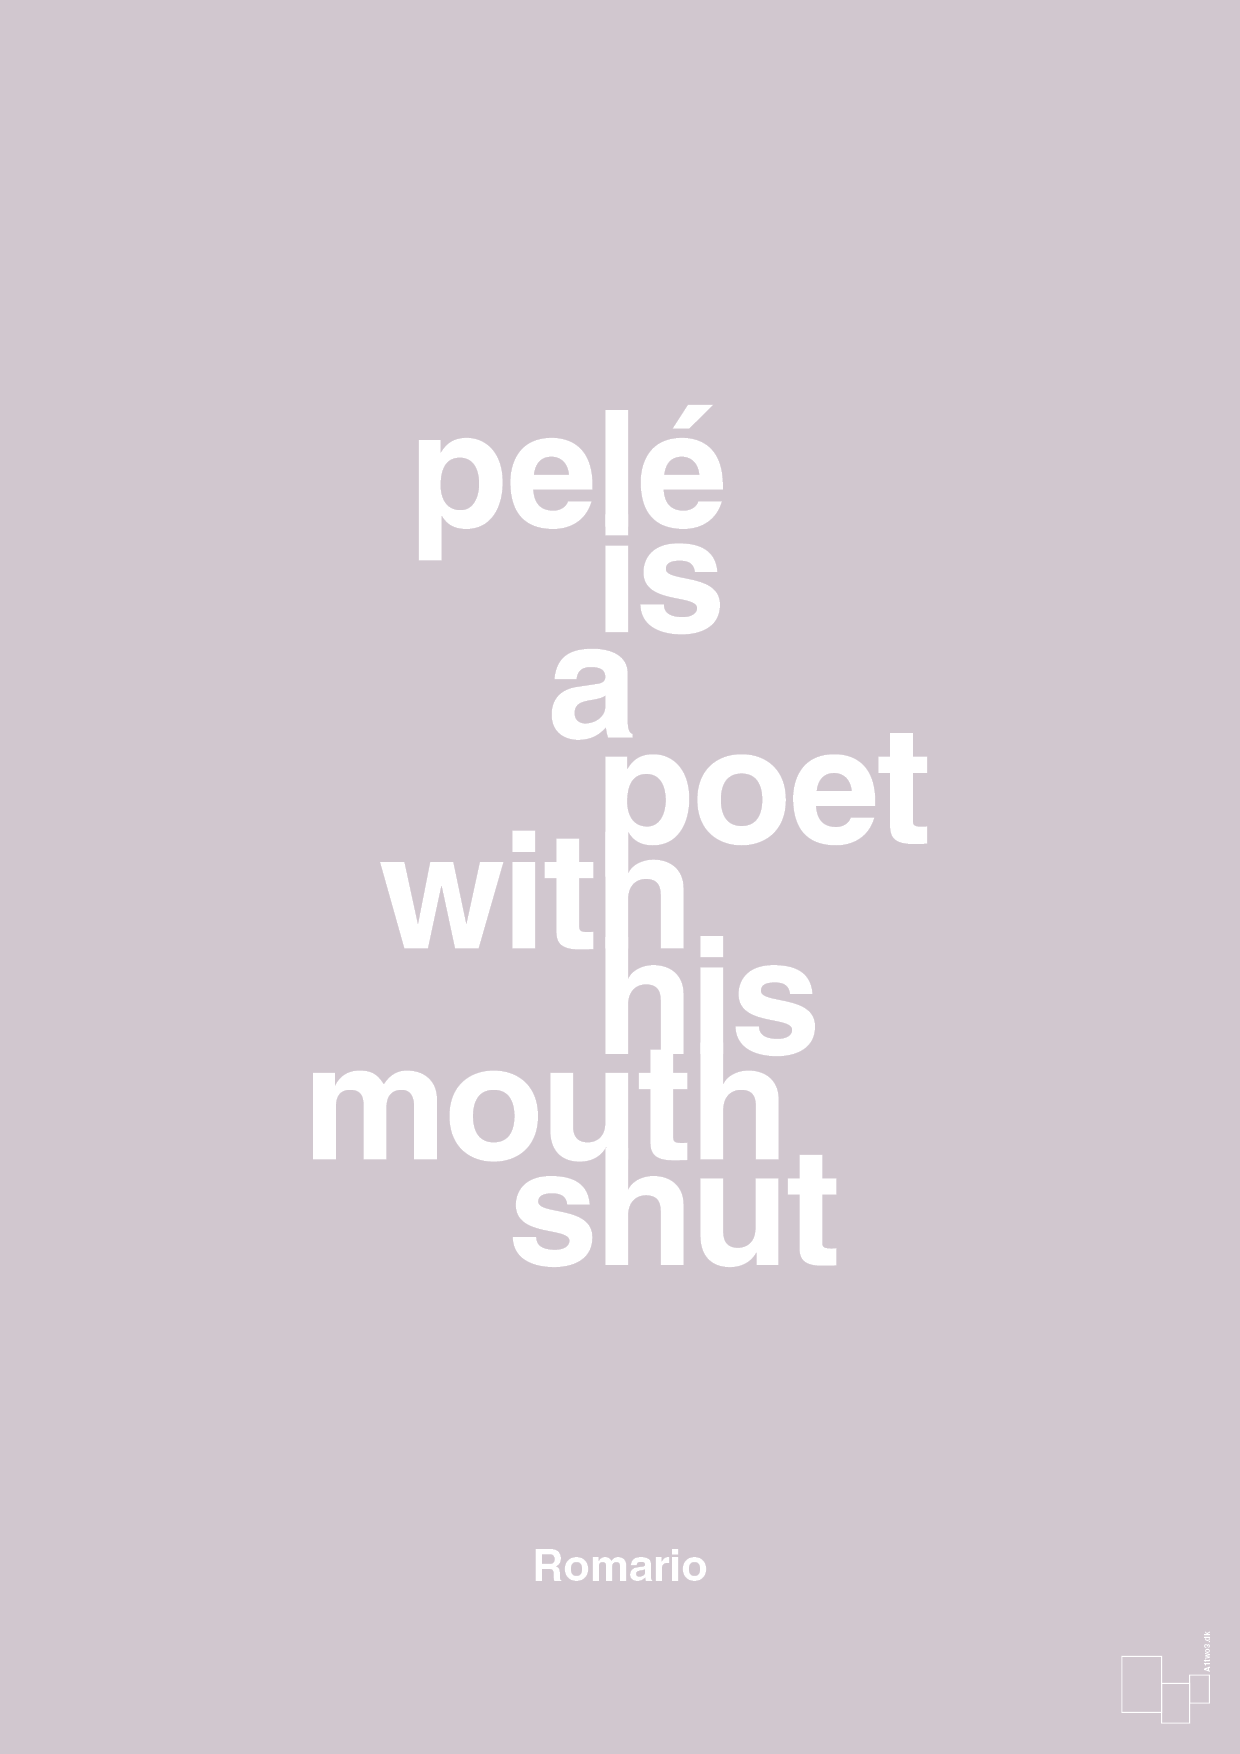 pelé is a poet with his mouth shut - Plakat med Citater i Dusty Lilac